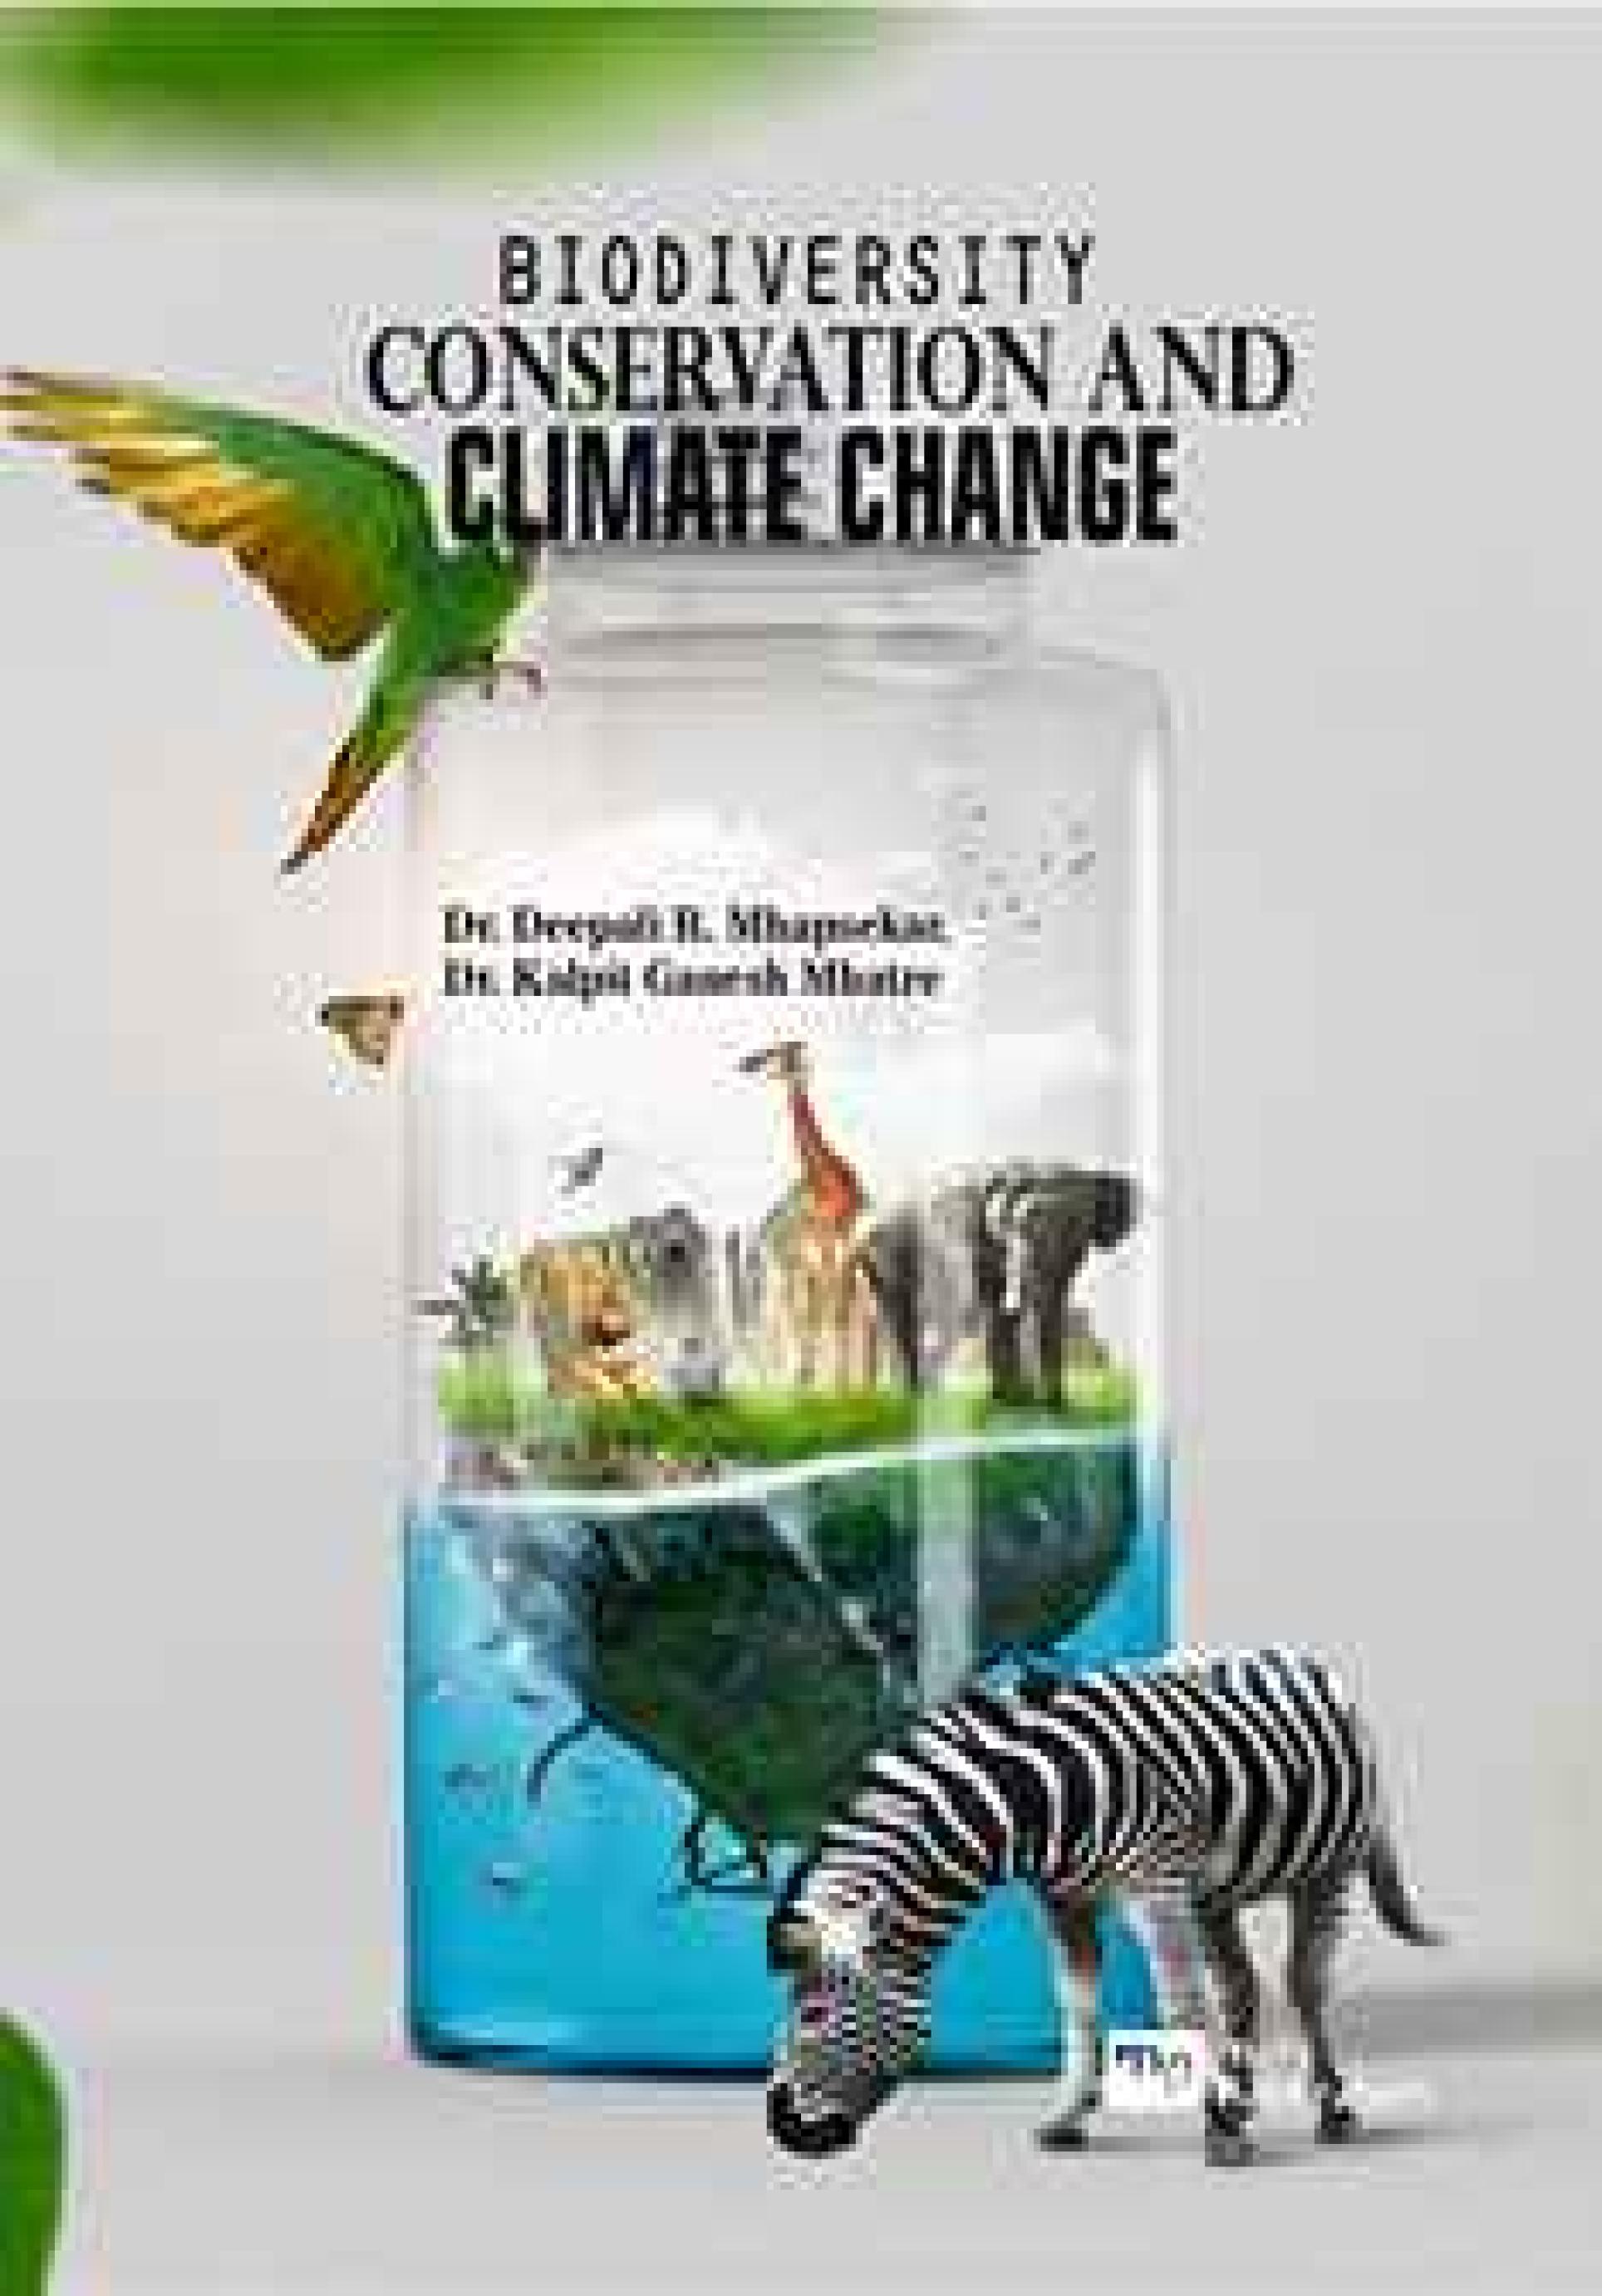 Biodiversity Conservation And Climate Change